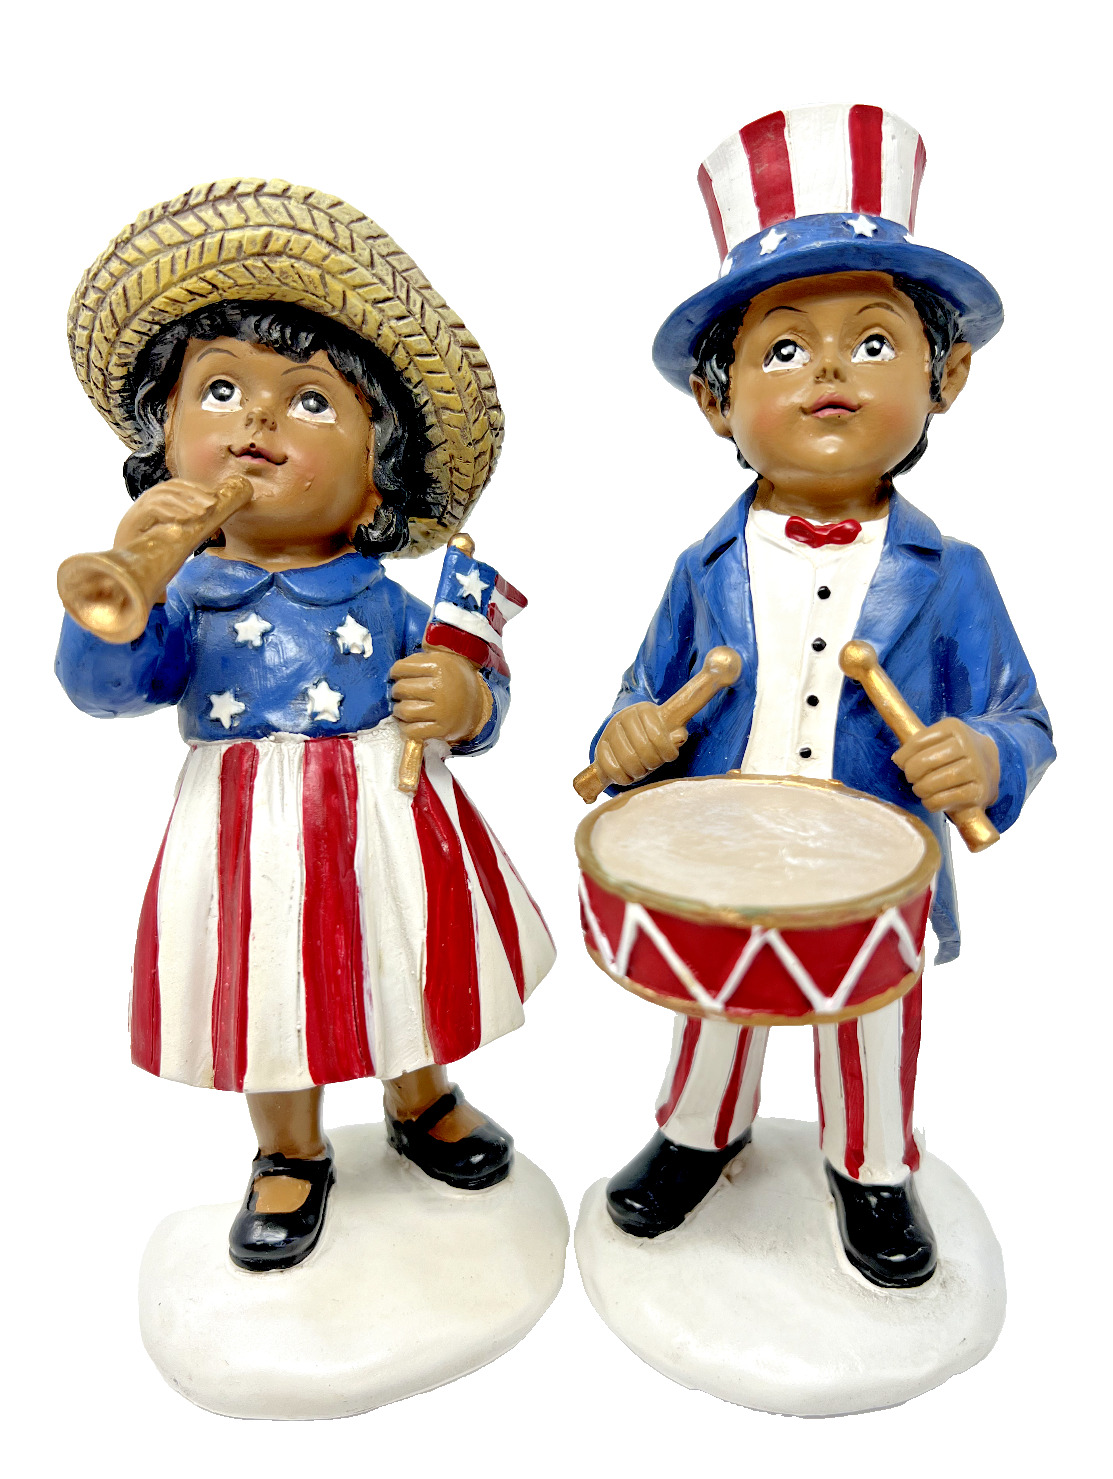 Valerie Parr Hill African American 4th July Children Figurines Vintage Style